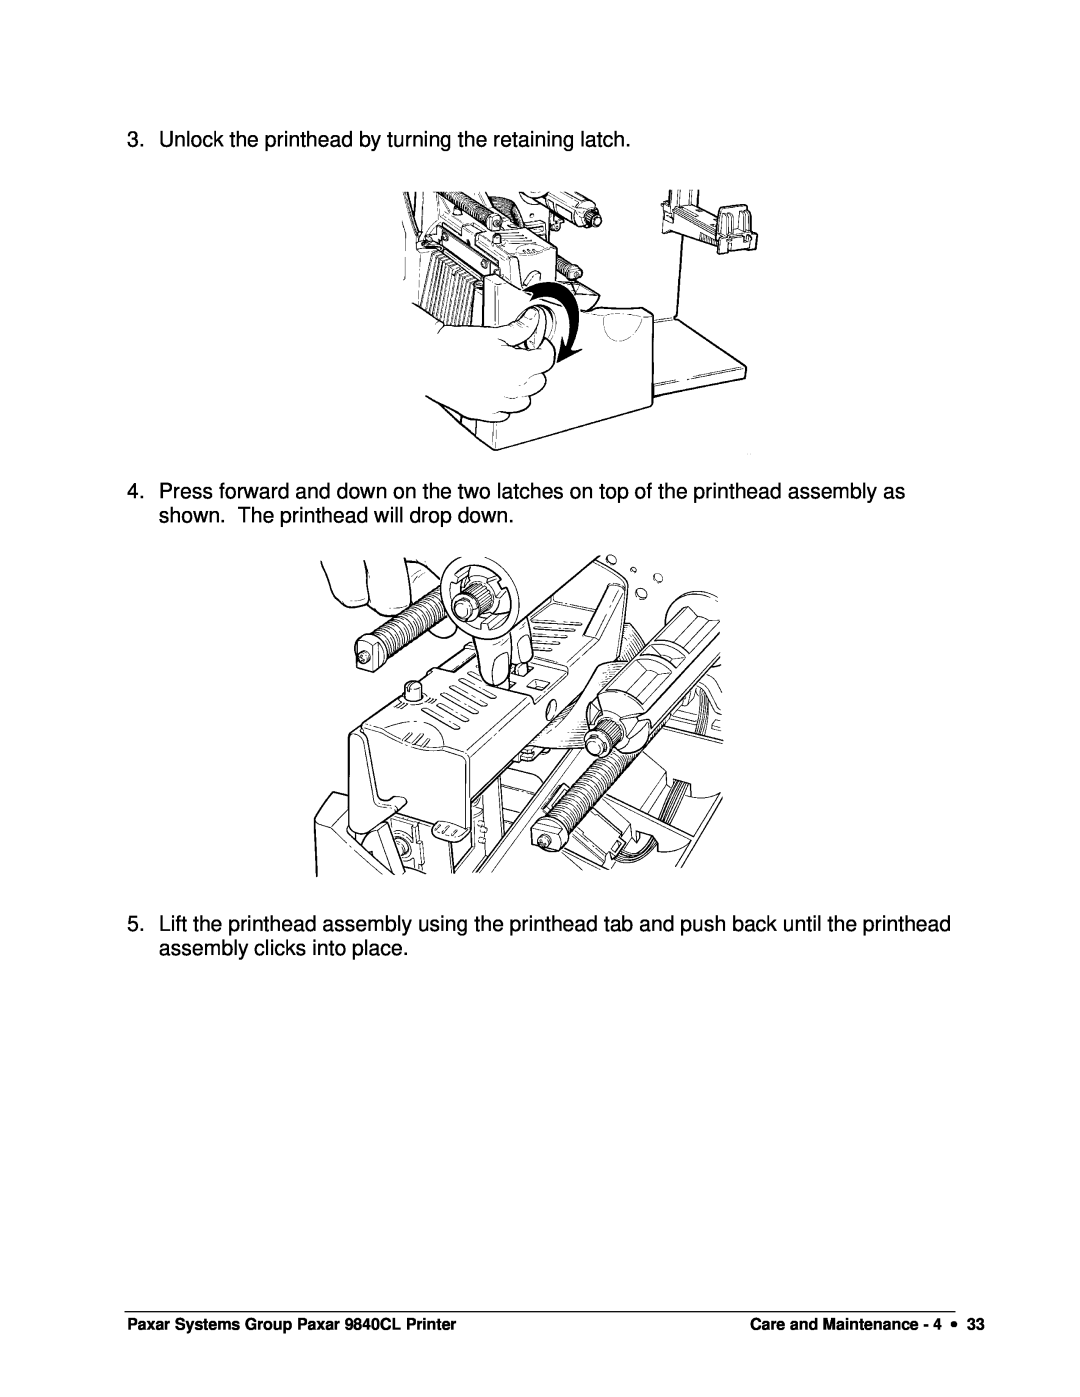 Paxar 9840CL user manual Unlock the printhead by turning the retaining latch 